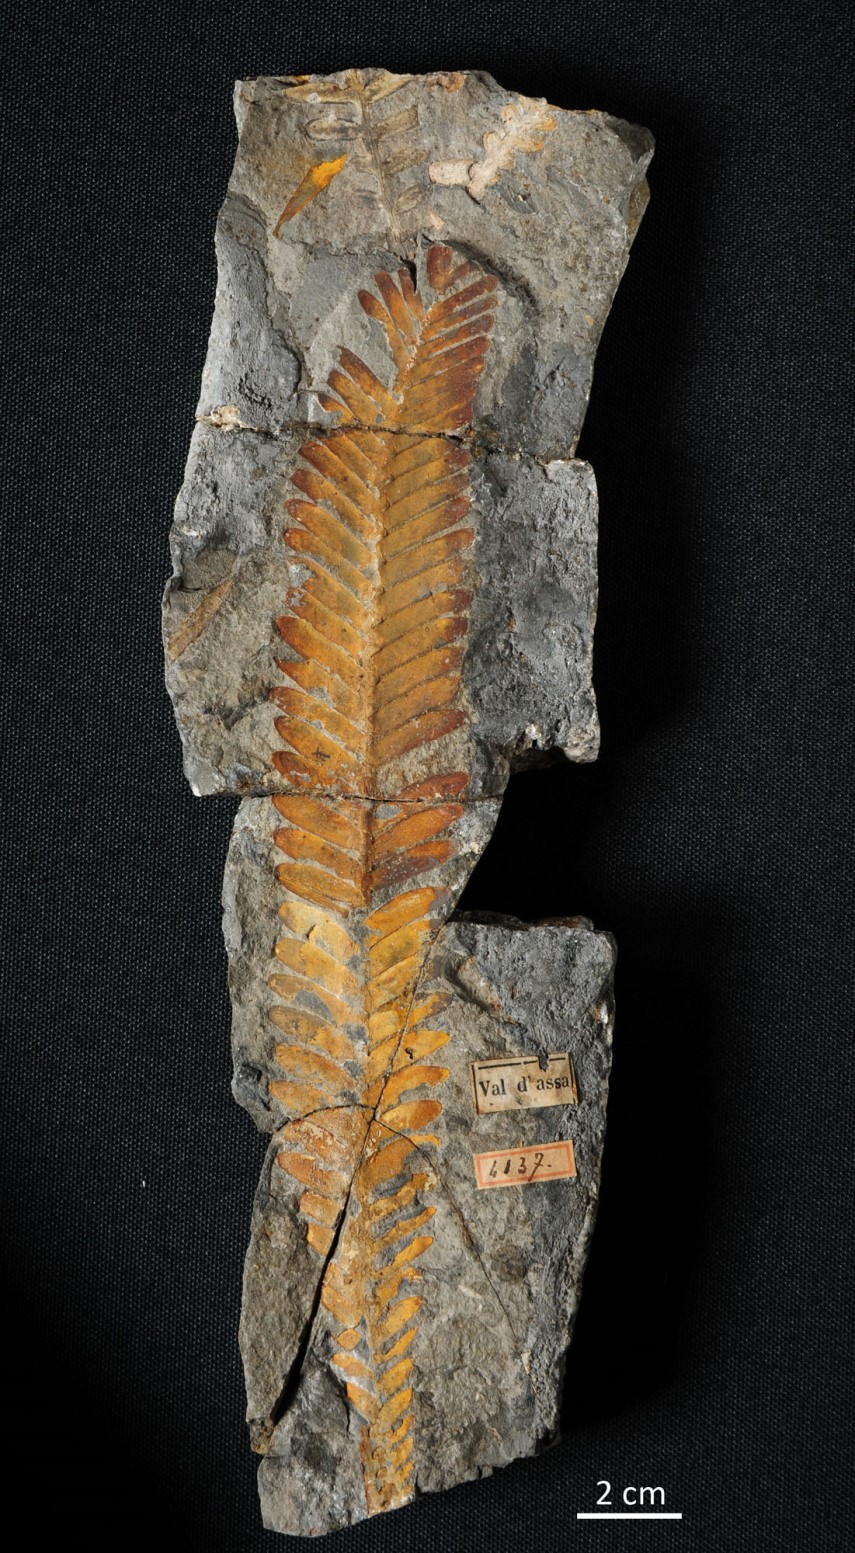 Otozamites sp. (4137) Cycad leaf. Coutesy of the section of Geology and Palaeontology of the Museum of Nature and Humankind of the University of Padua (MNU).